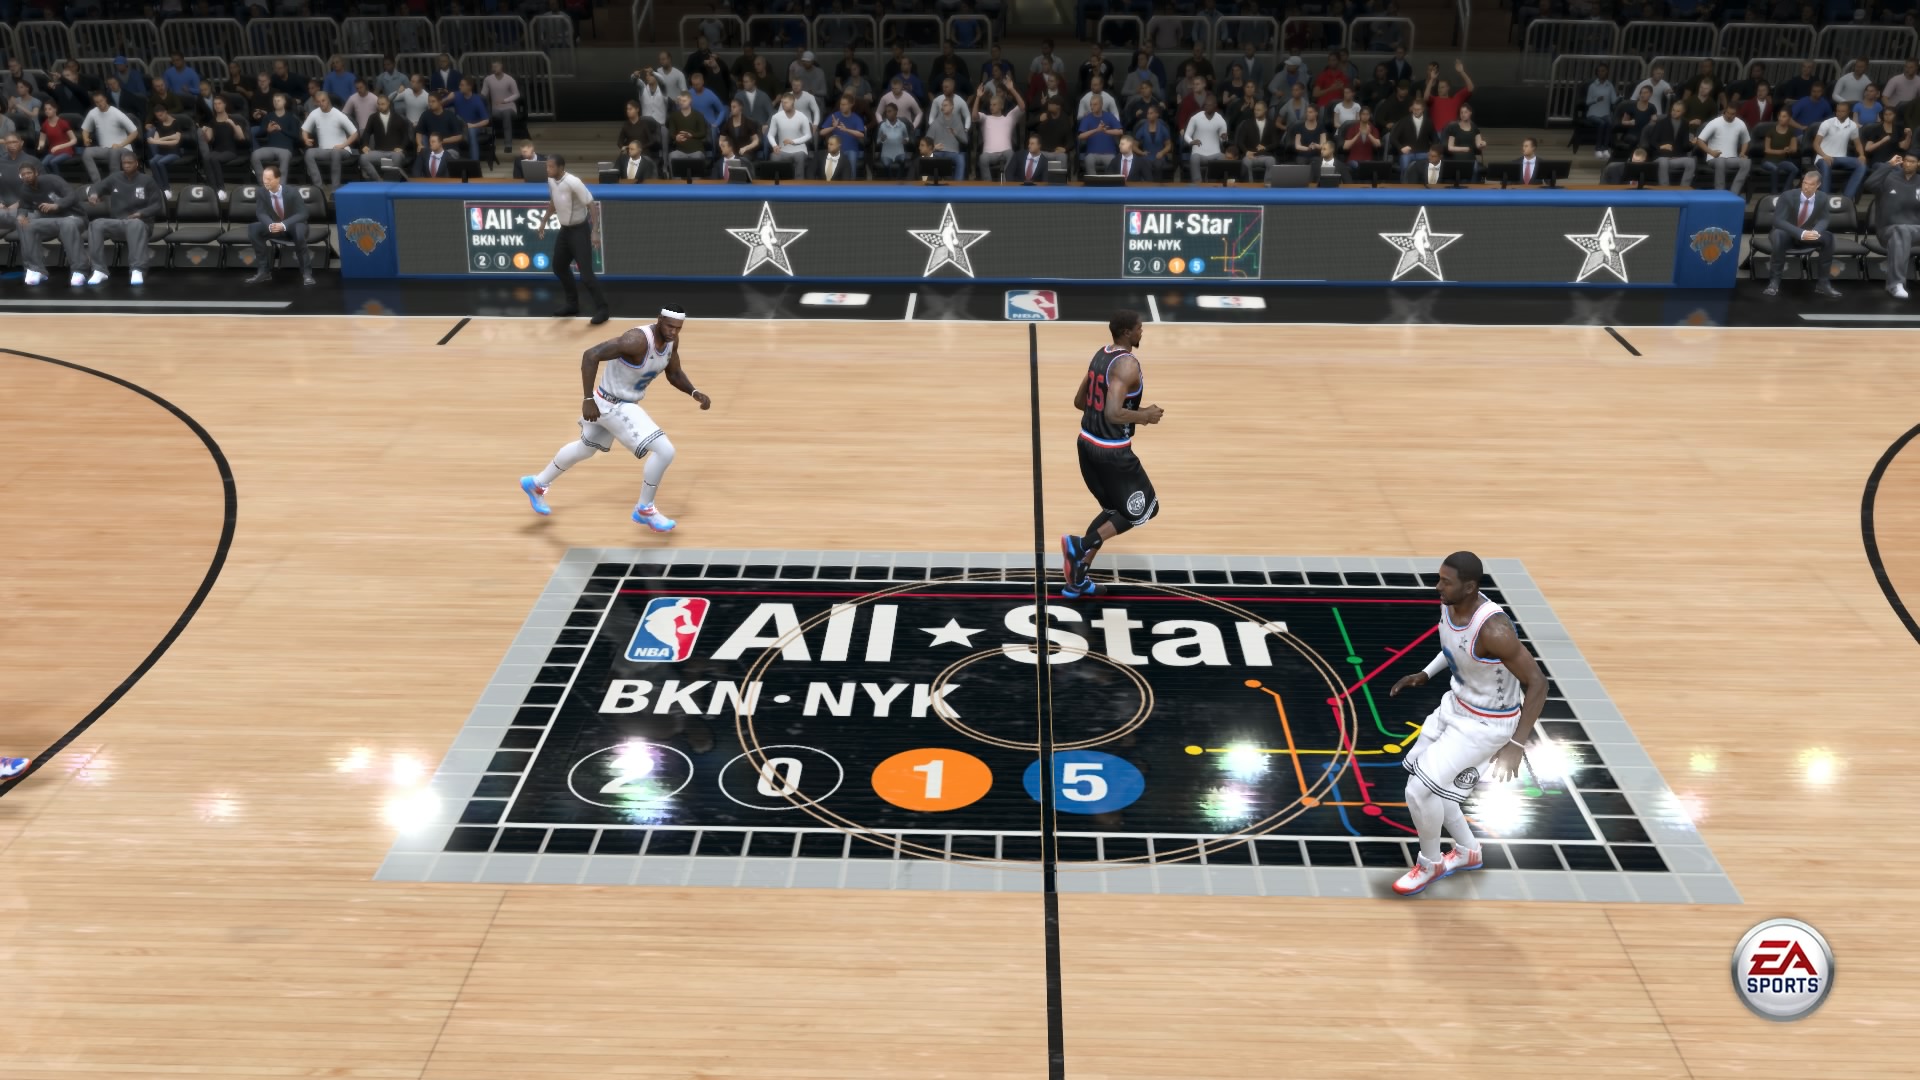 NBA Live 15 - 2015 All-Star Game Content & More